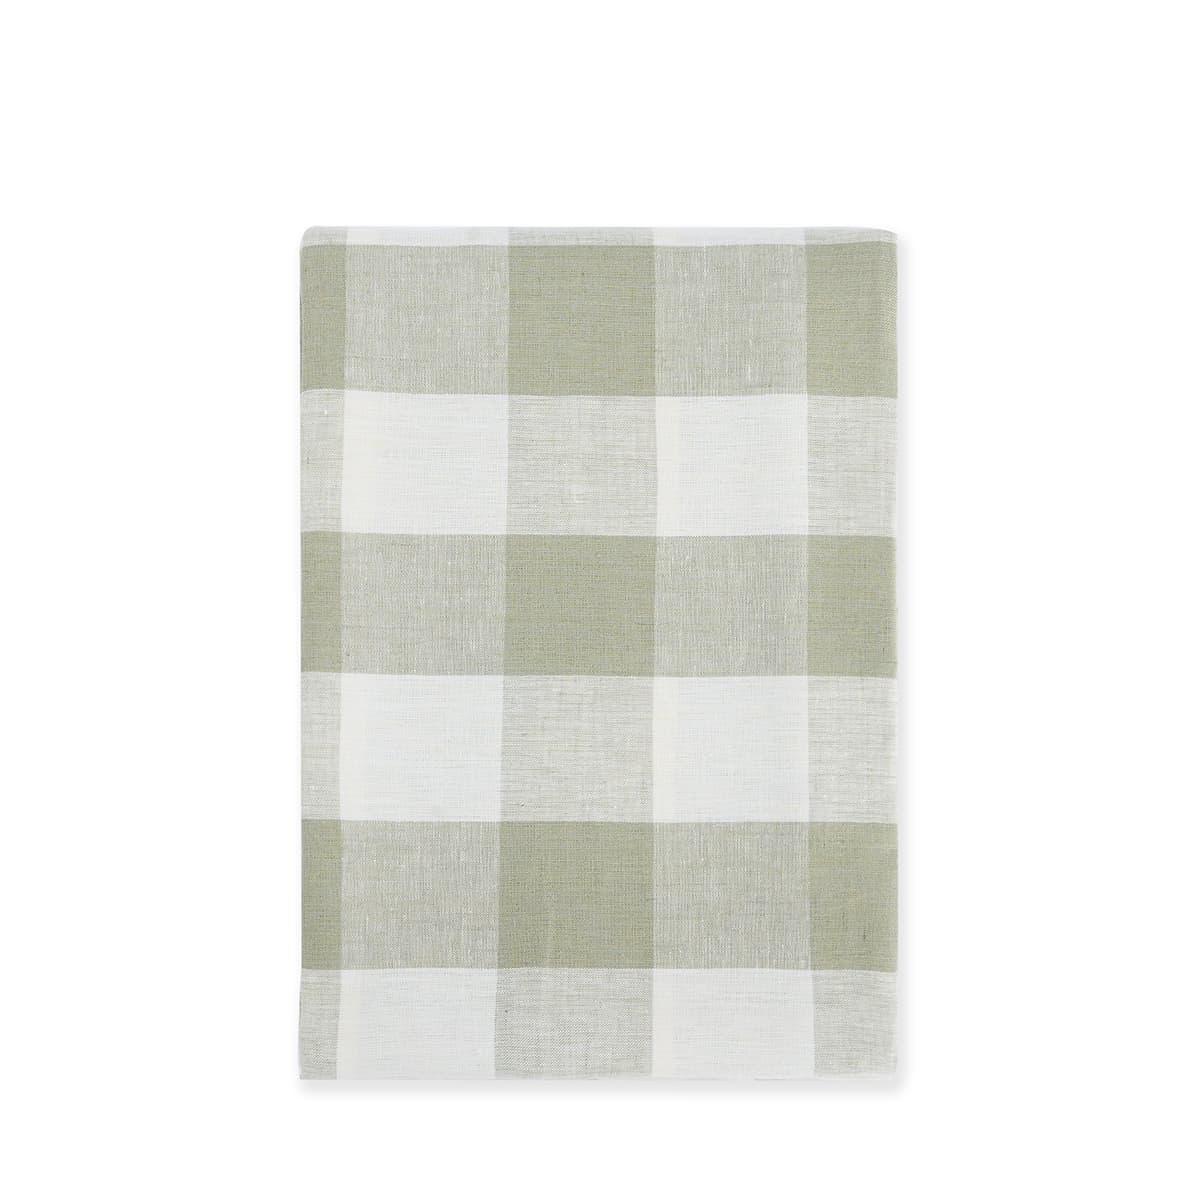 White and Olive Gingham Linen Tablecloth